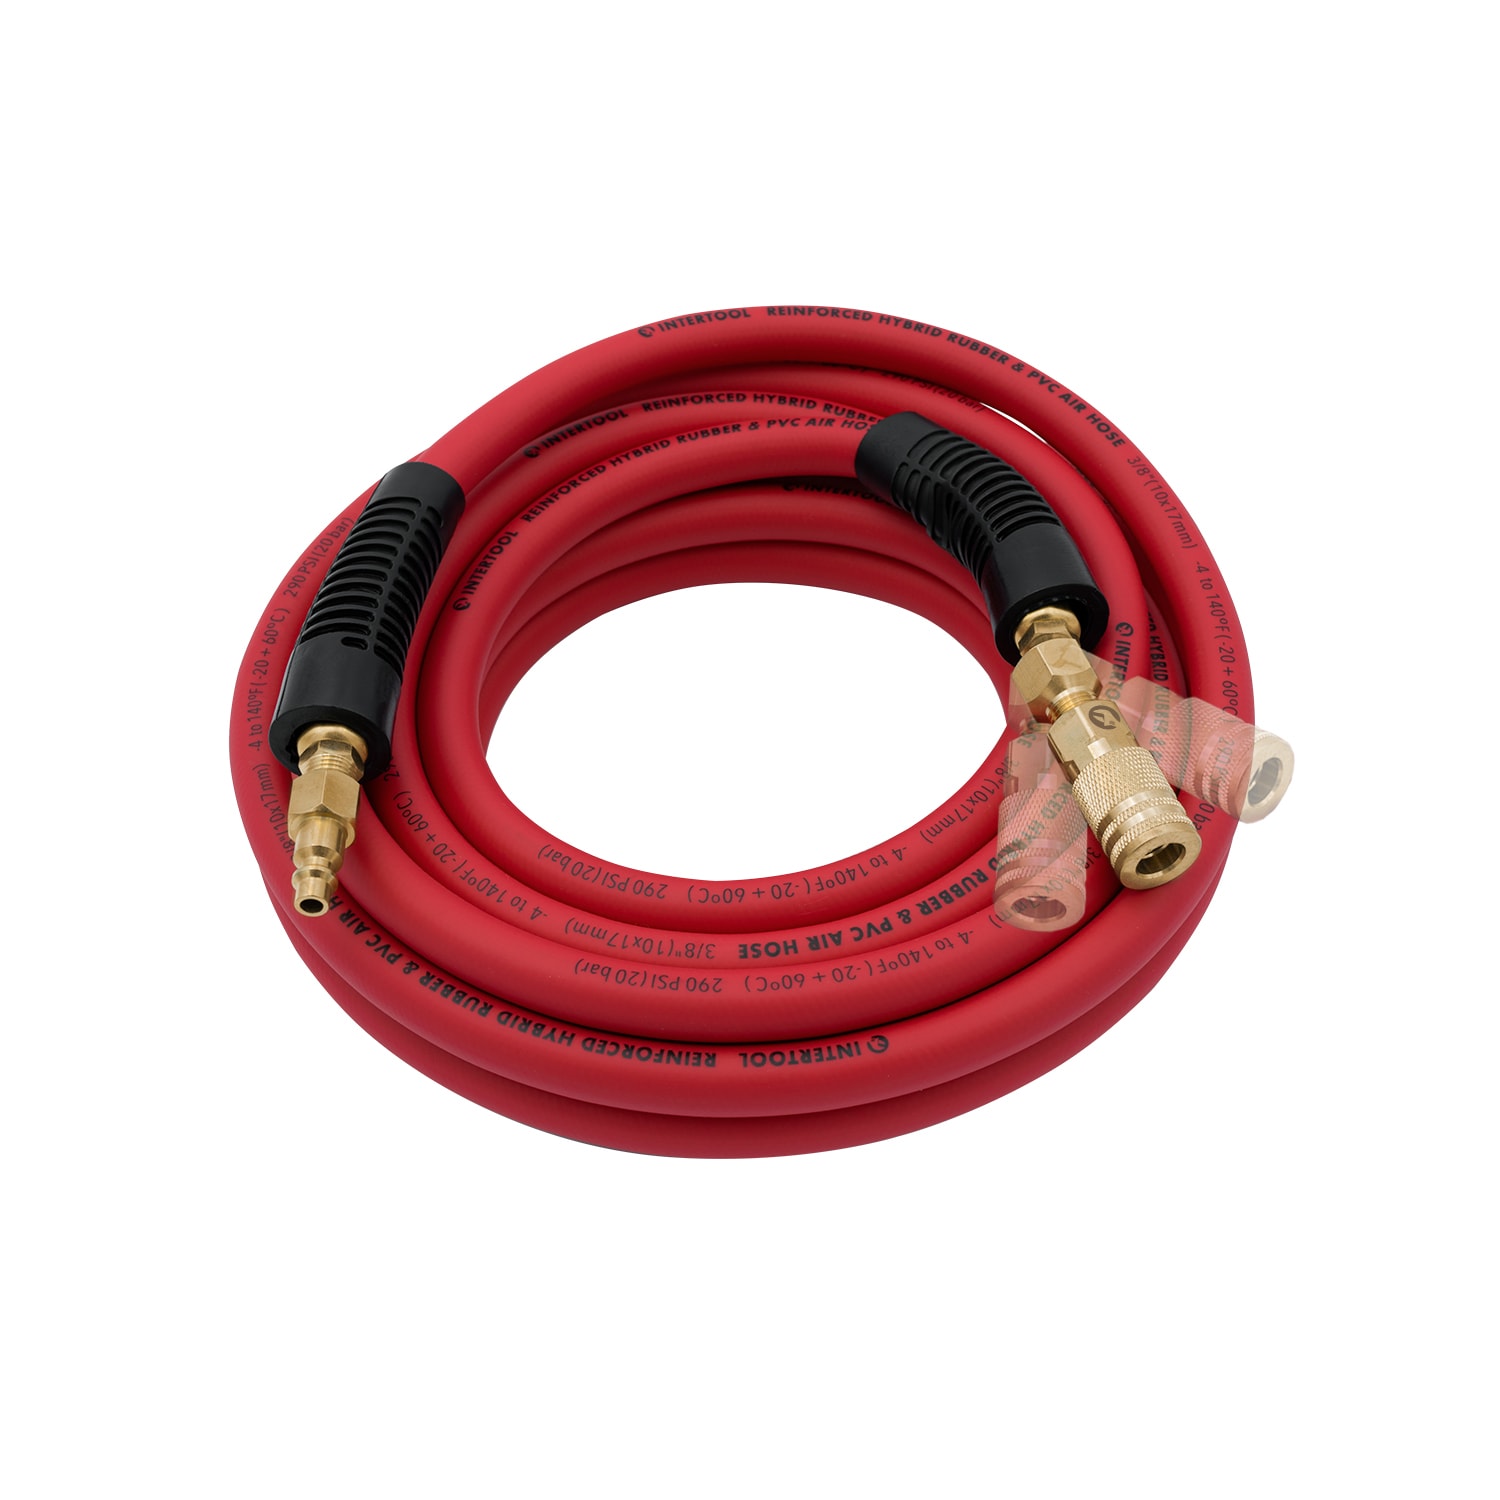 CRAFTSMAN 3/8-in 50-Ft Rubber Air Hose in the Air Compressor Hoses